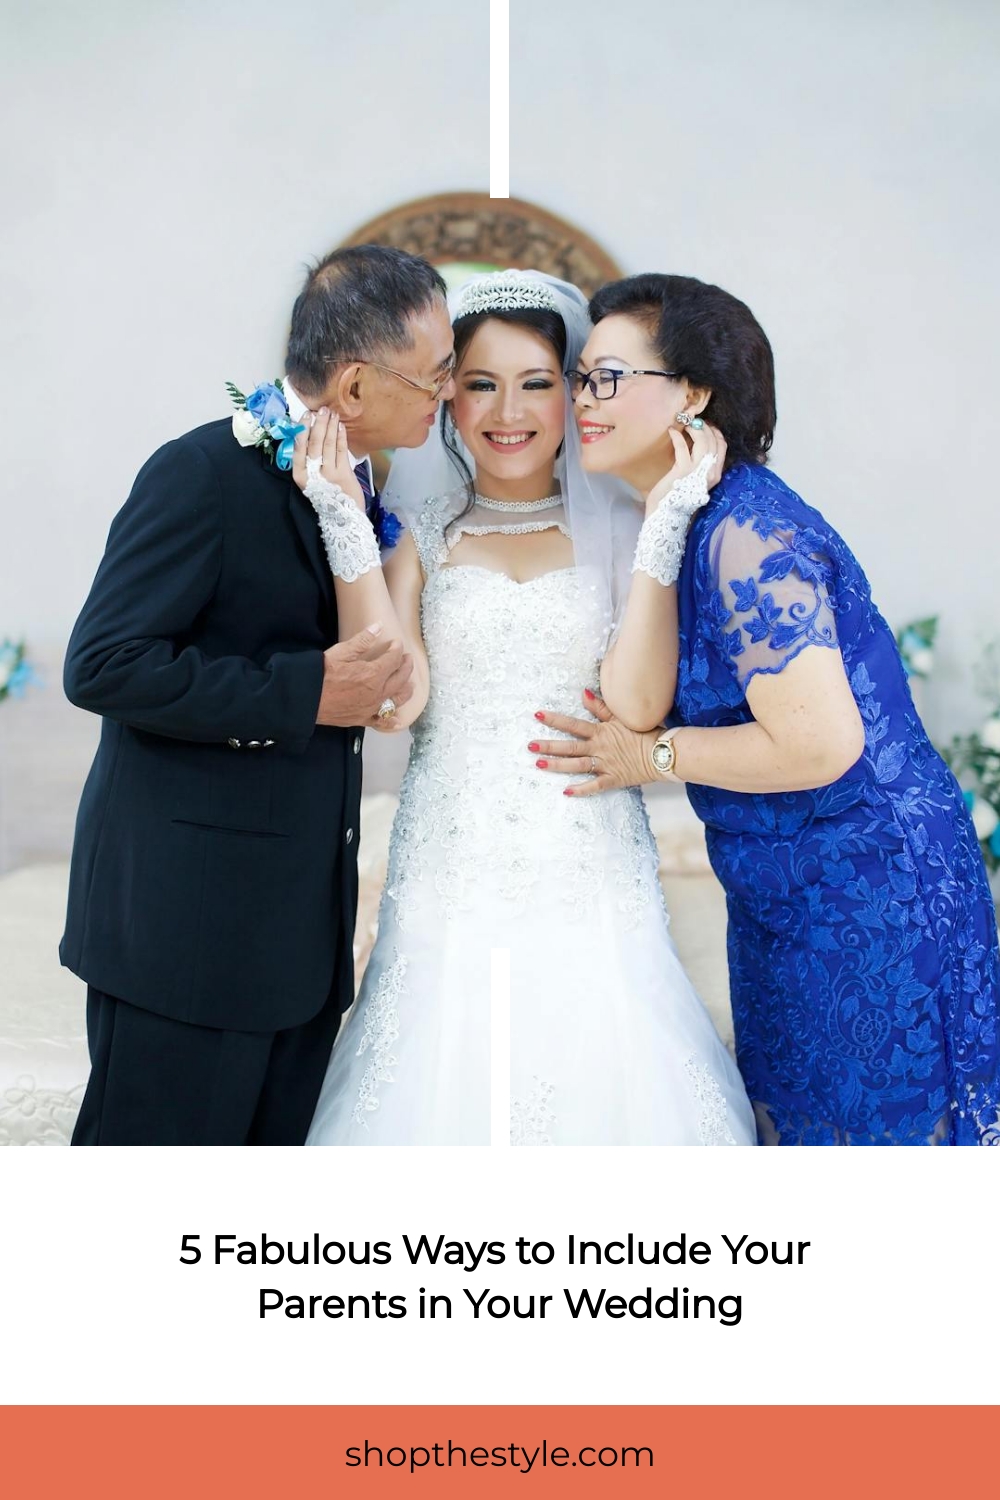 5 Fabulous Ways to Include Your Parents in Your Wedding